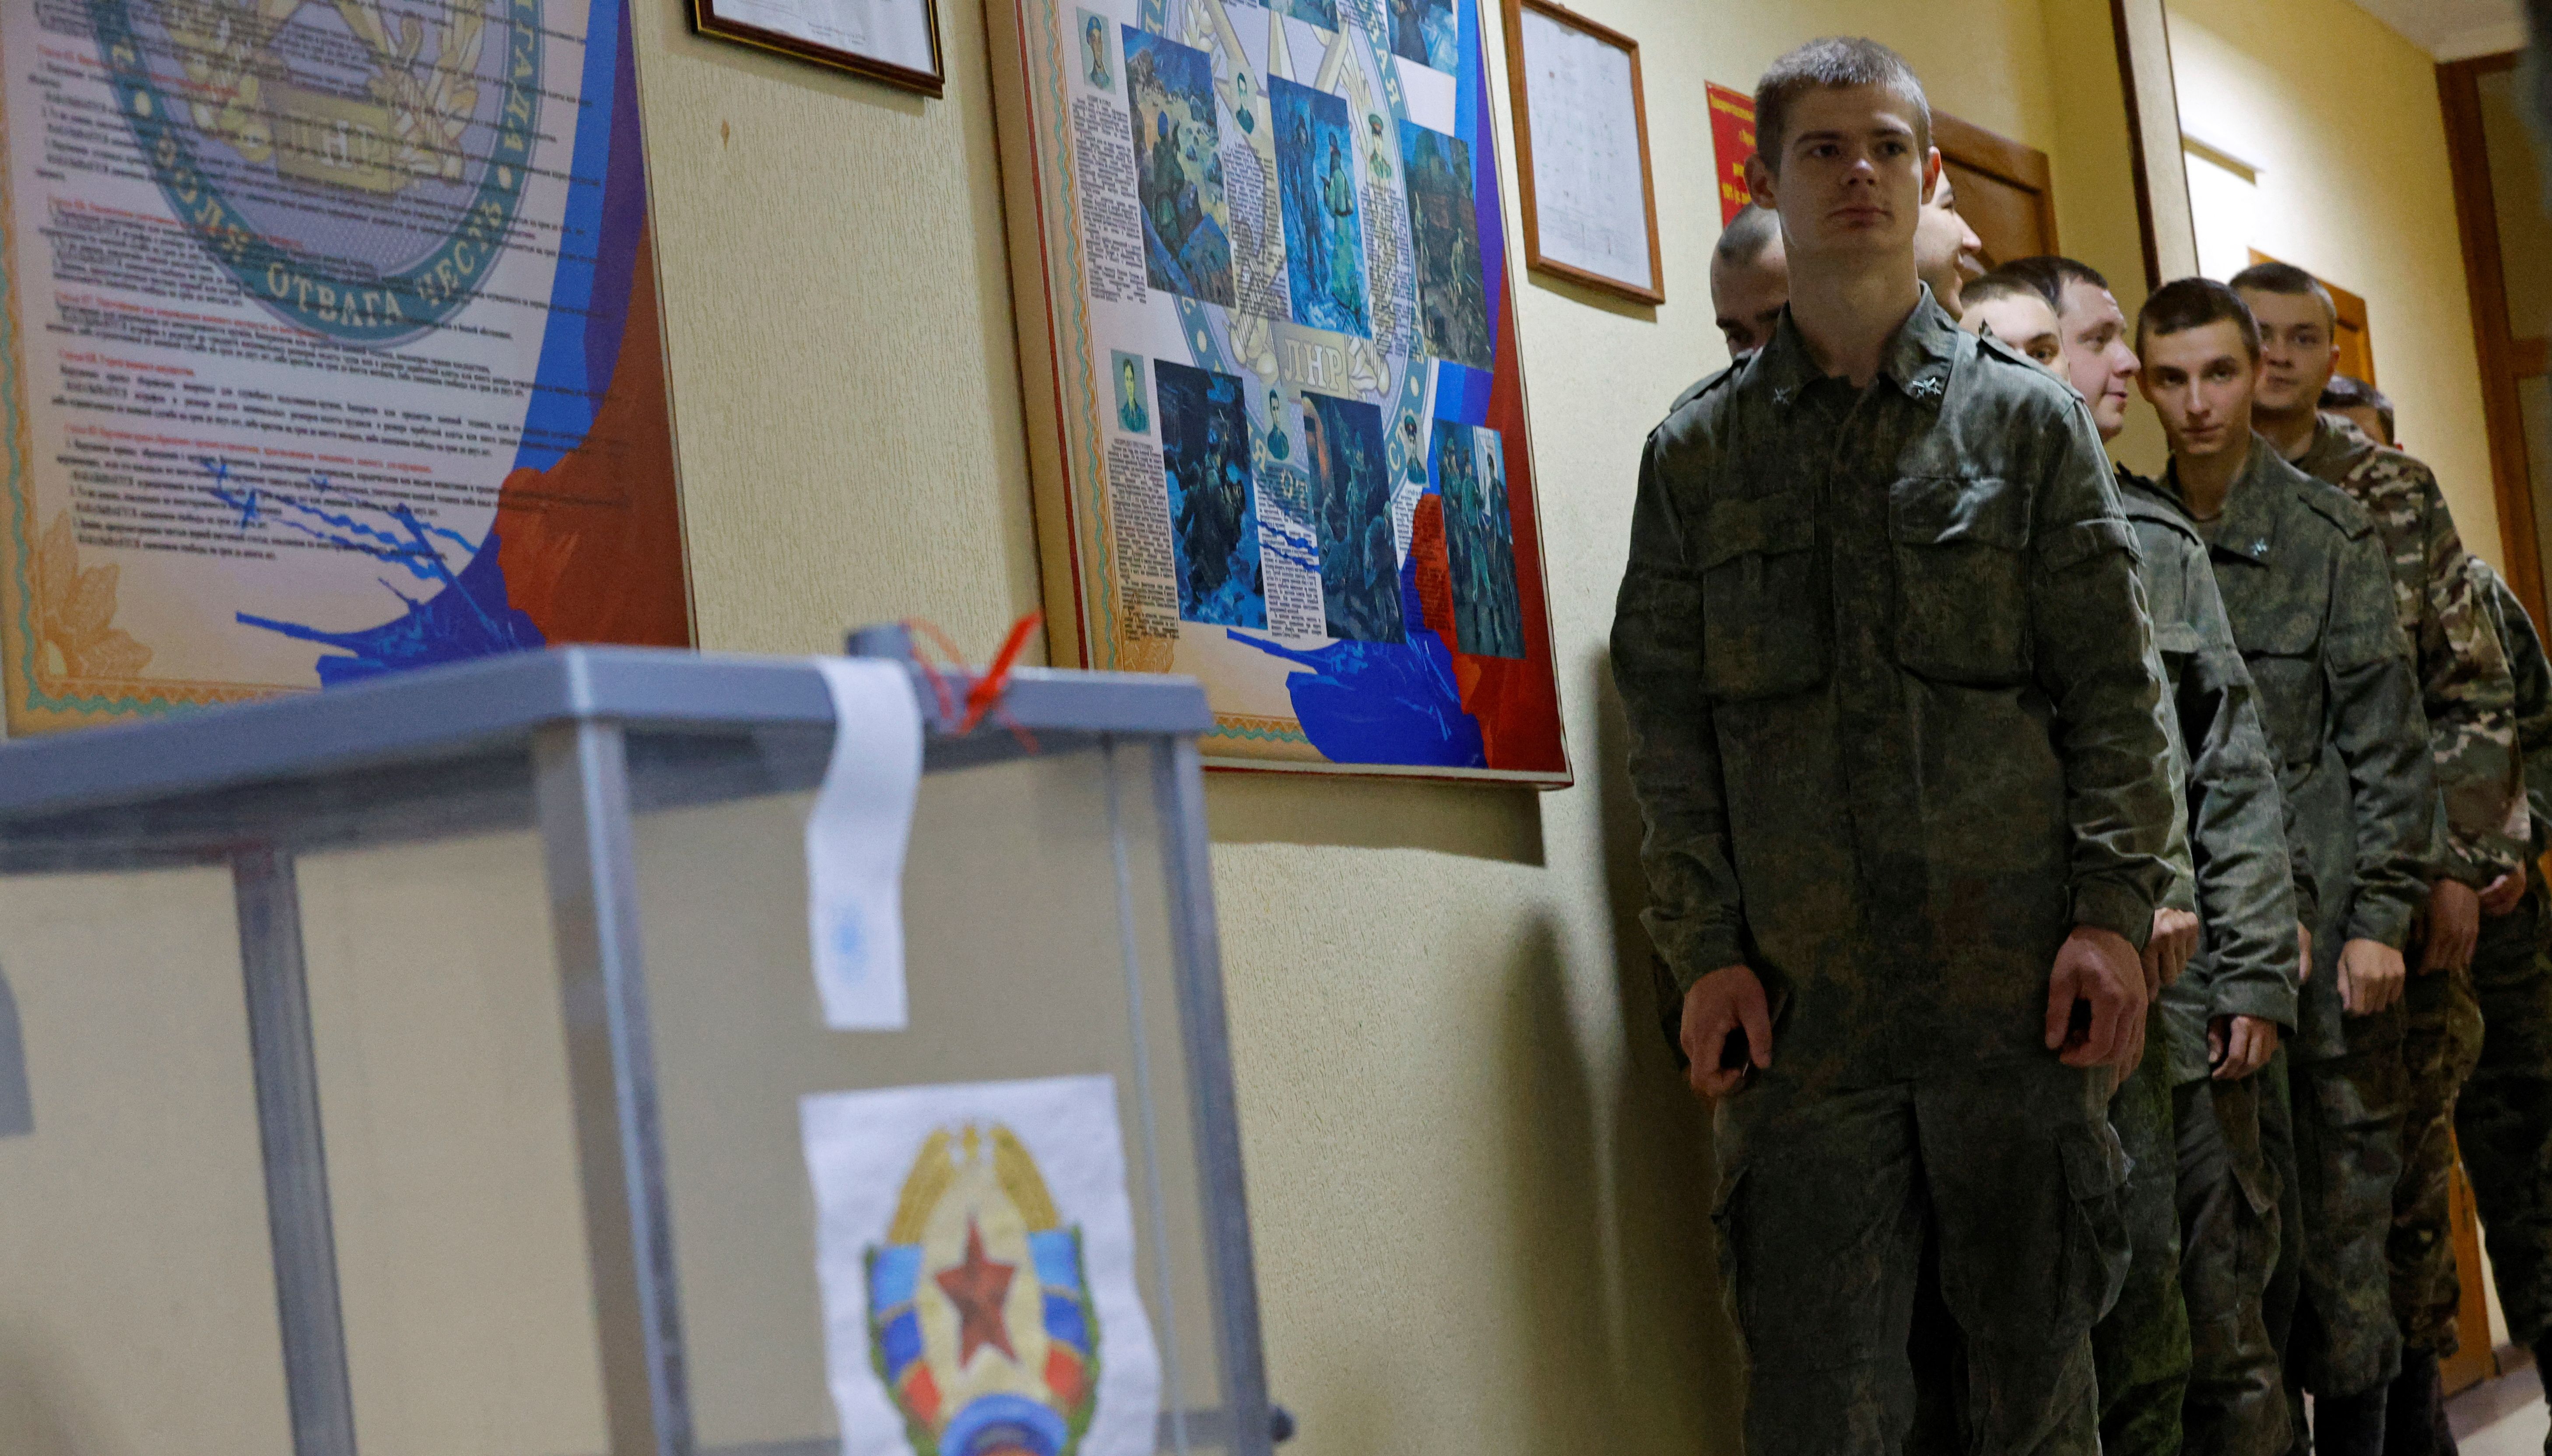 Service members of the self-proclaimed Luhansk People's Republic line up to vote during a referendum on joining LPR to Russia, at a military facility in Luhansk, Ukraine